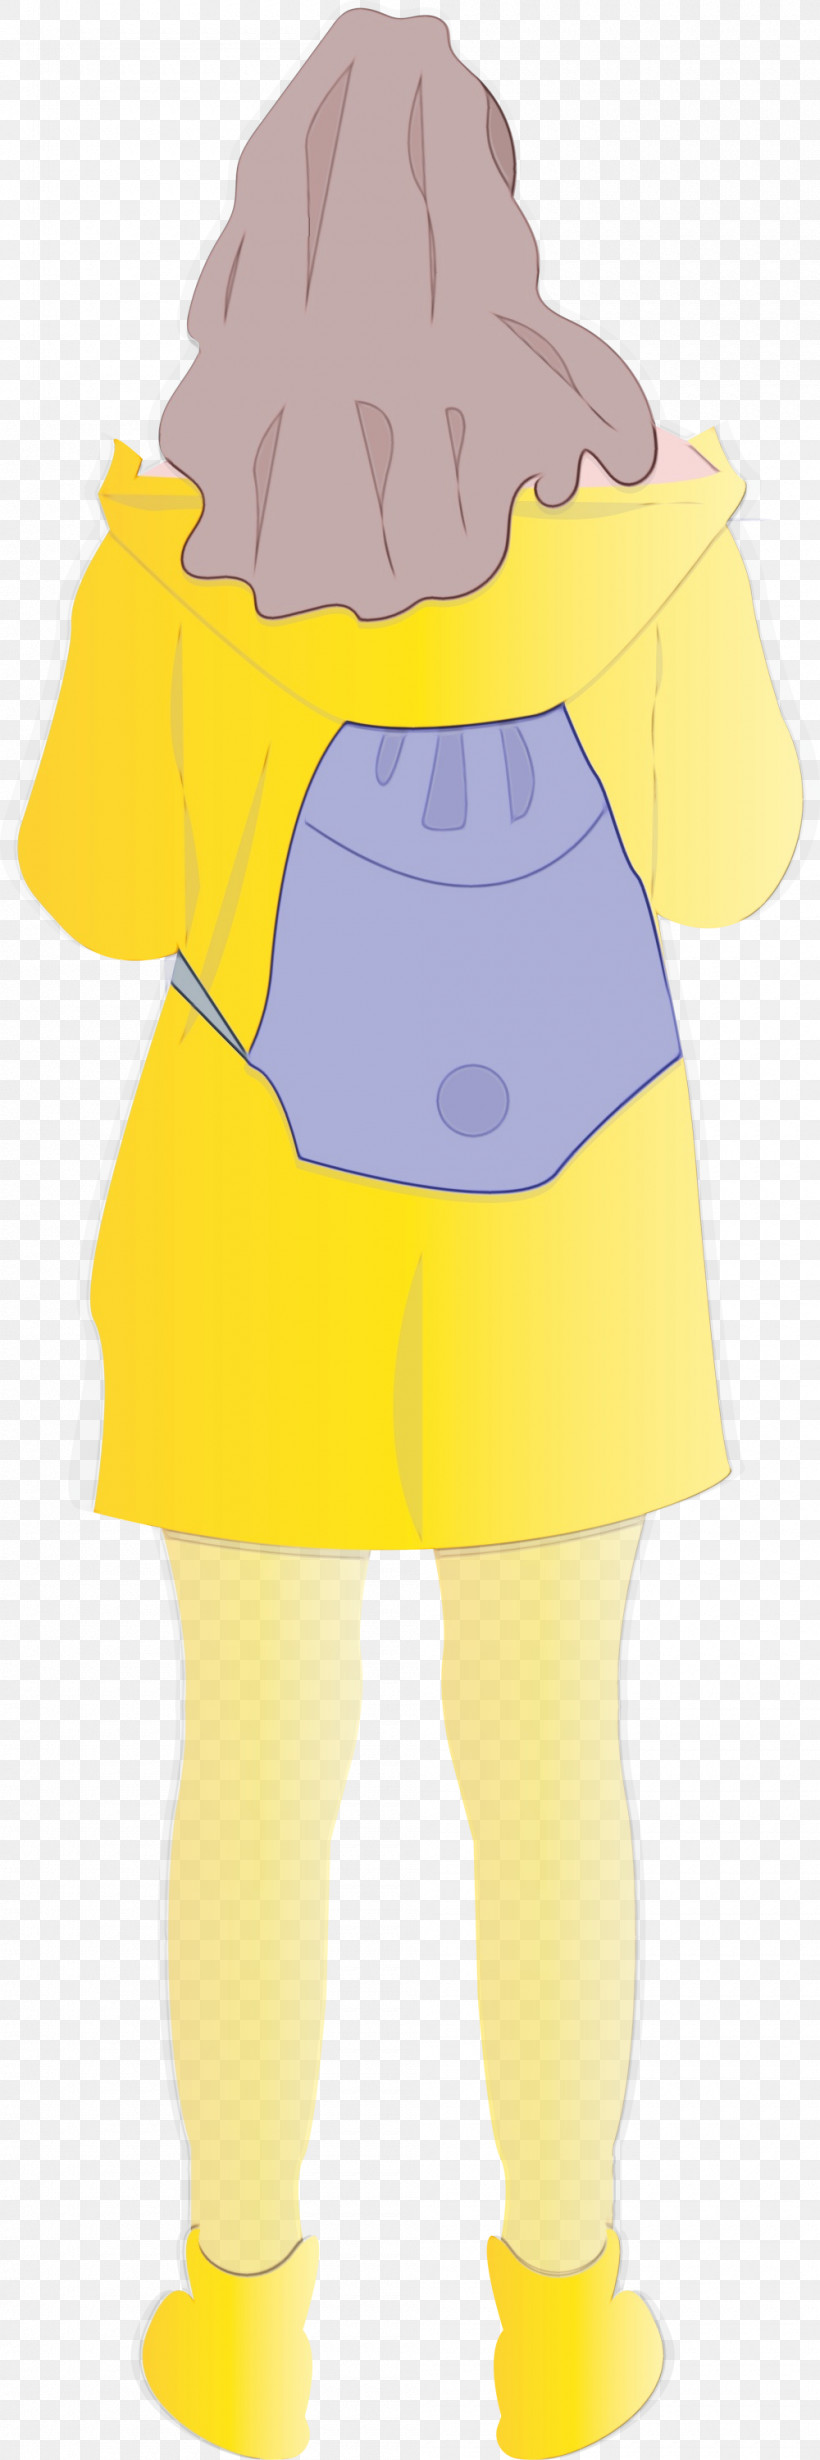 Yellow Clothing Cartoon Standing Dress, PNG, 1000x3000px, Girl, Baby Toddler Clothing, Cartoon, Clothing, Costume Download Free